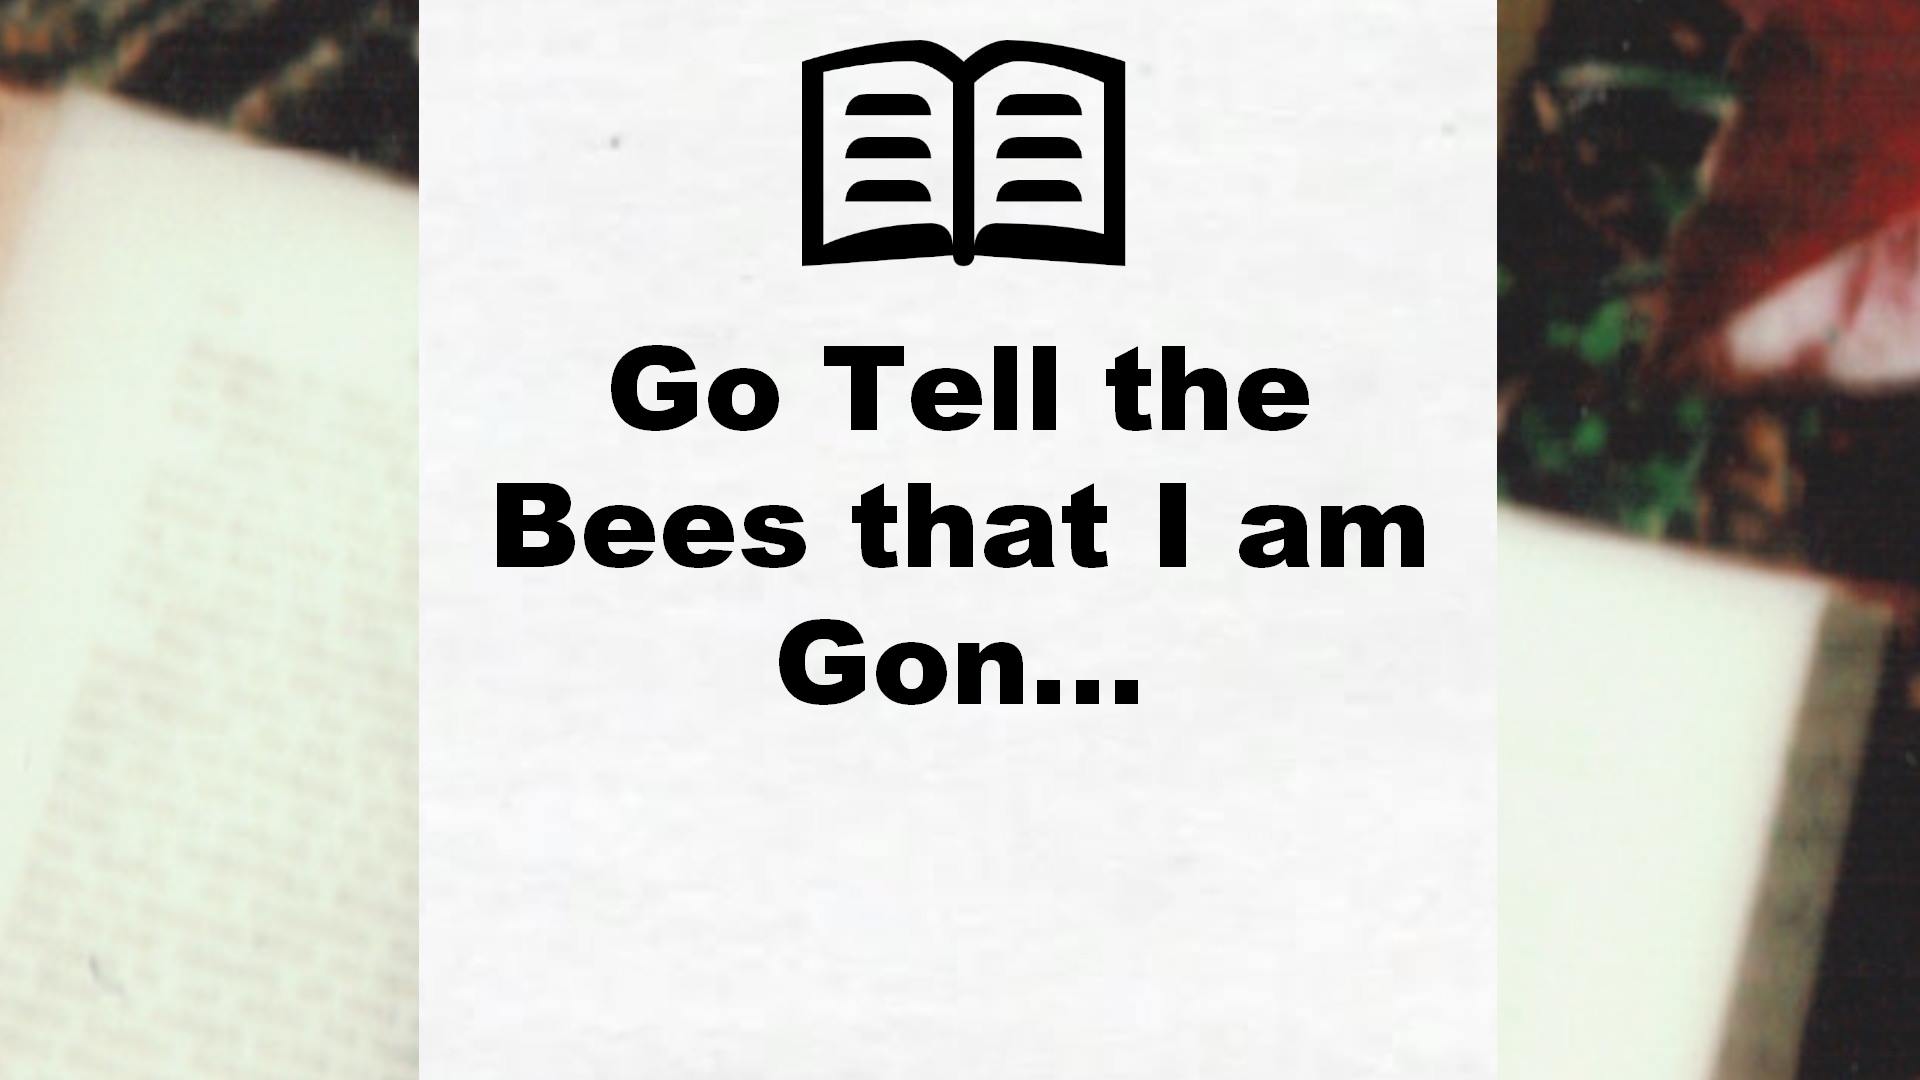 Go Tell the Bees that I am Gon… – Critique